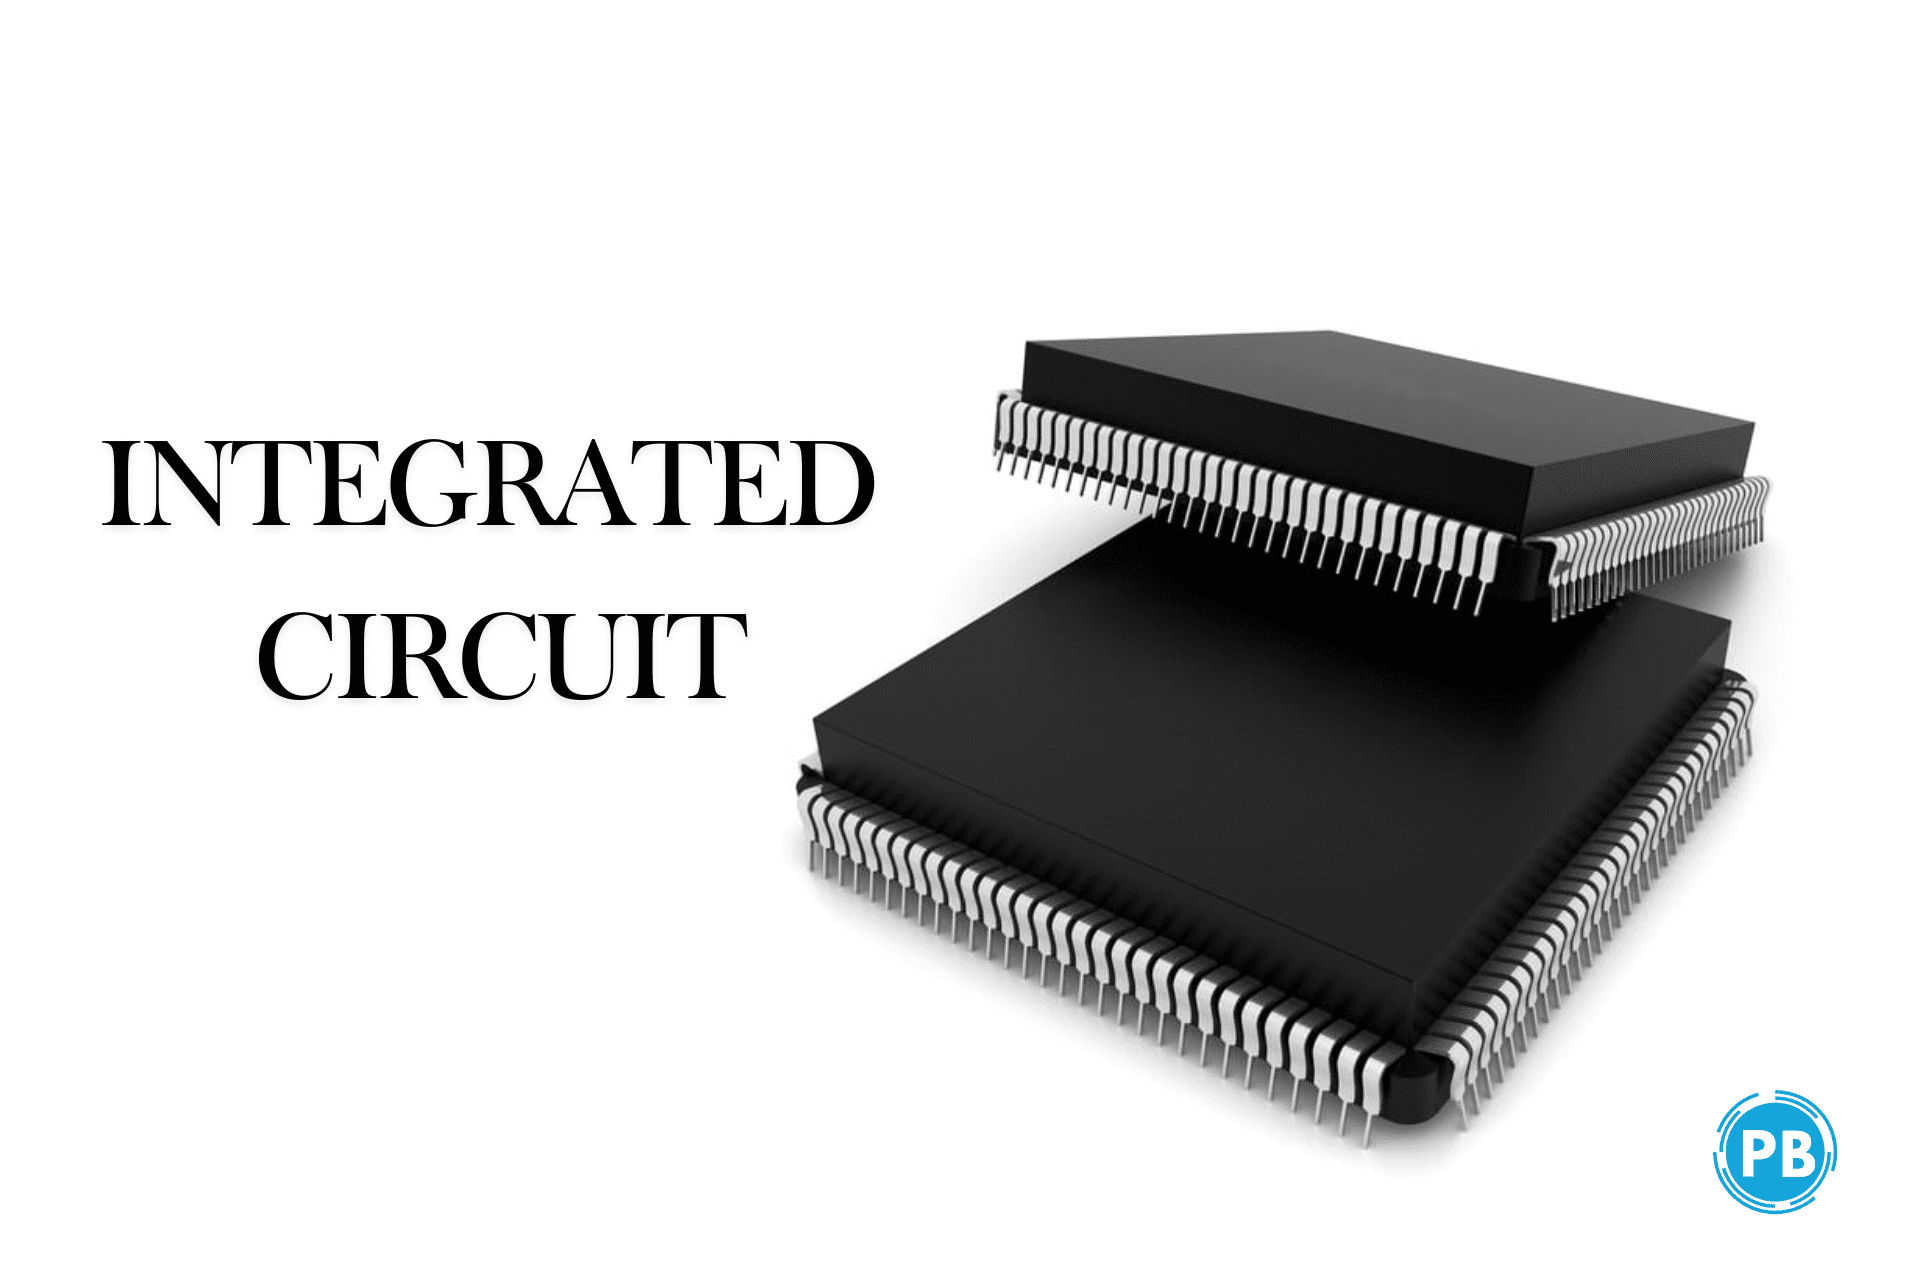 Integrated Circuit details